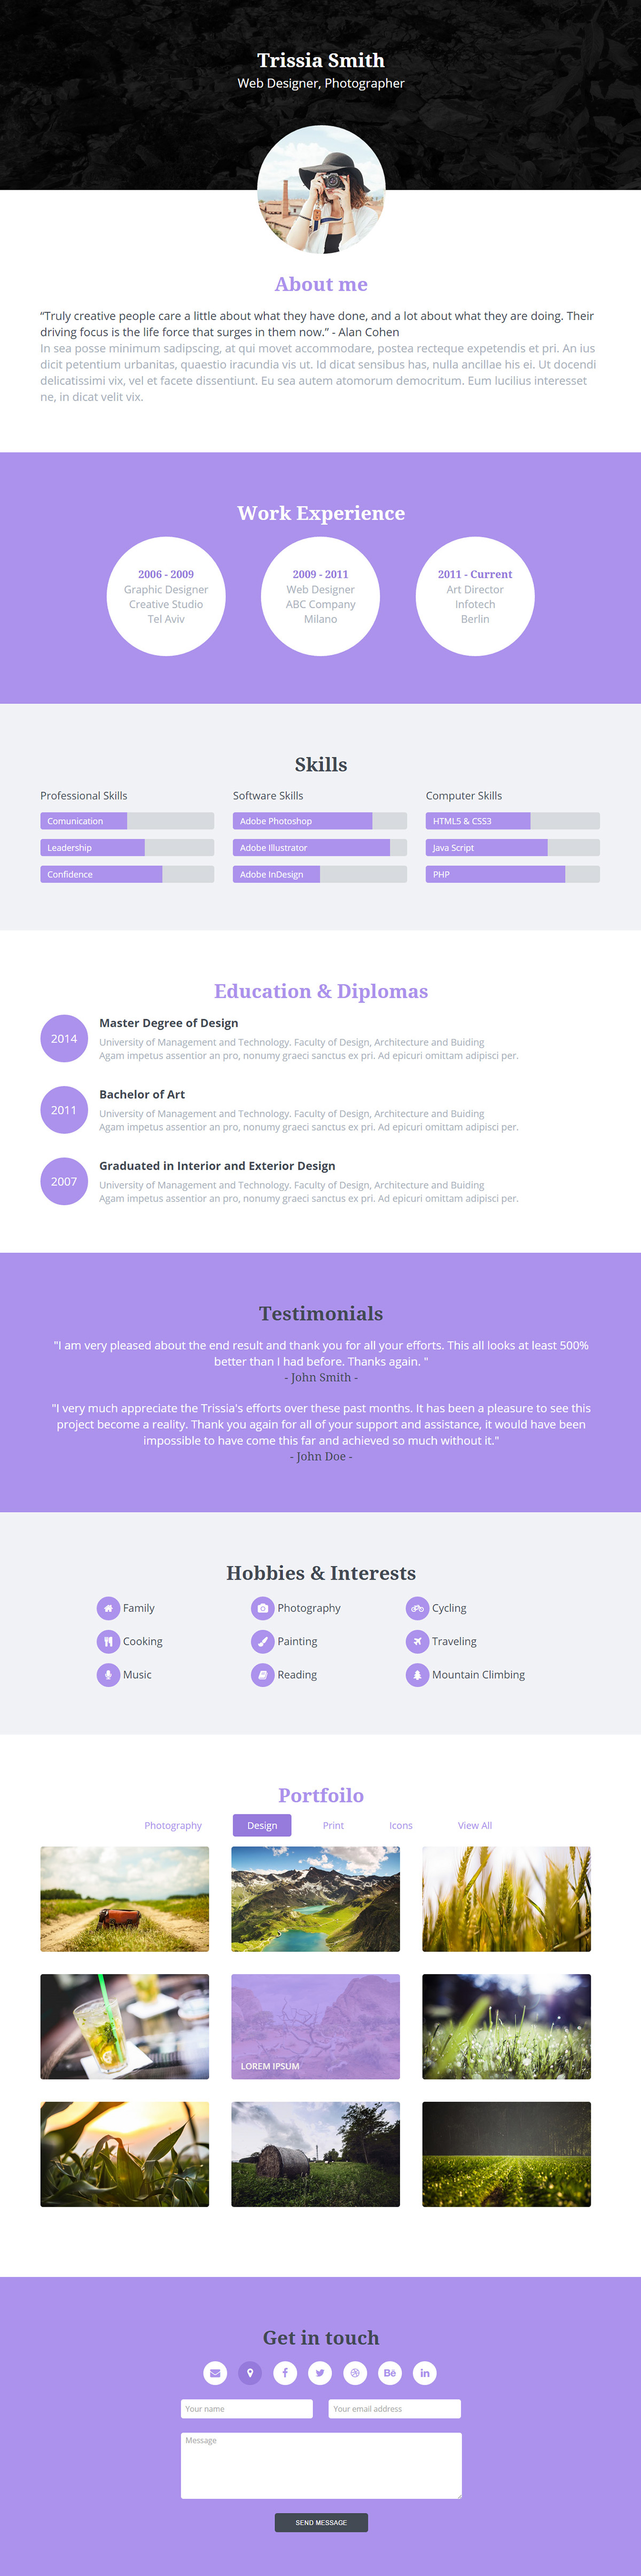 contact Curriculum Vitae CV Education Experience gallery HTML One page personal portfolio Resume skills template Testimonials